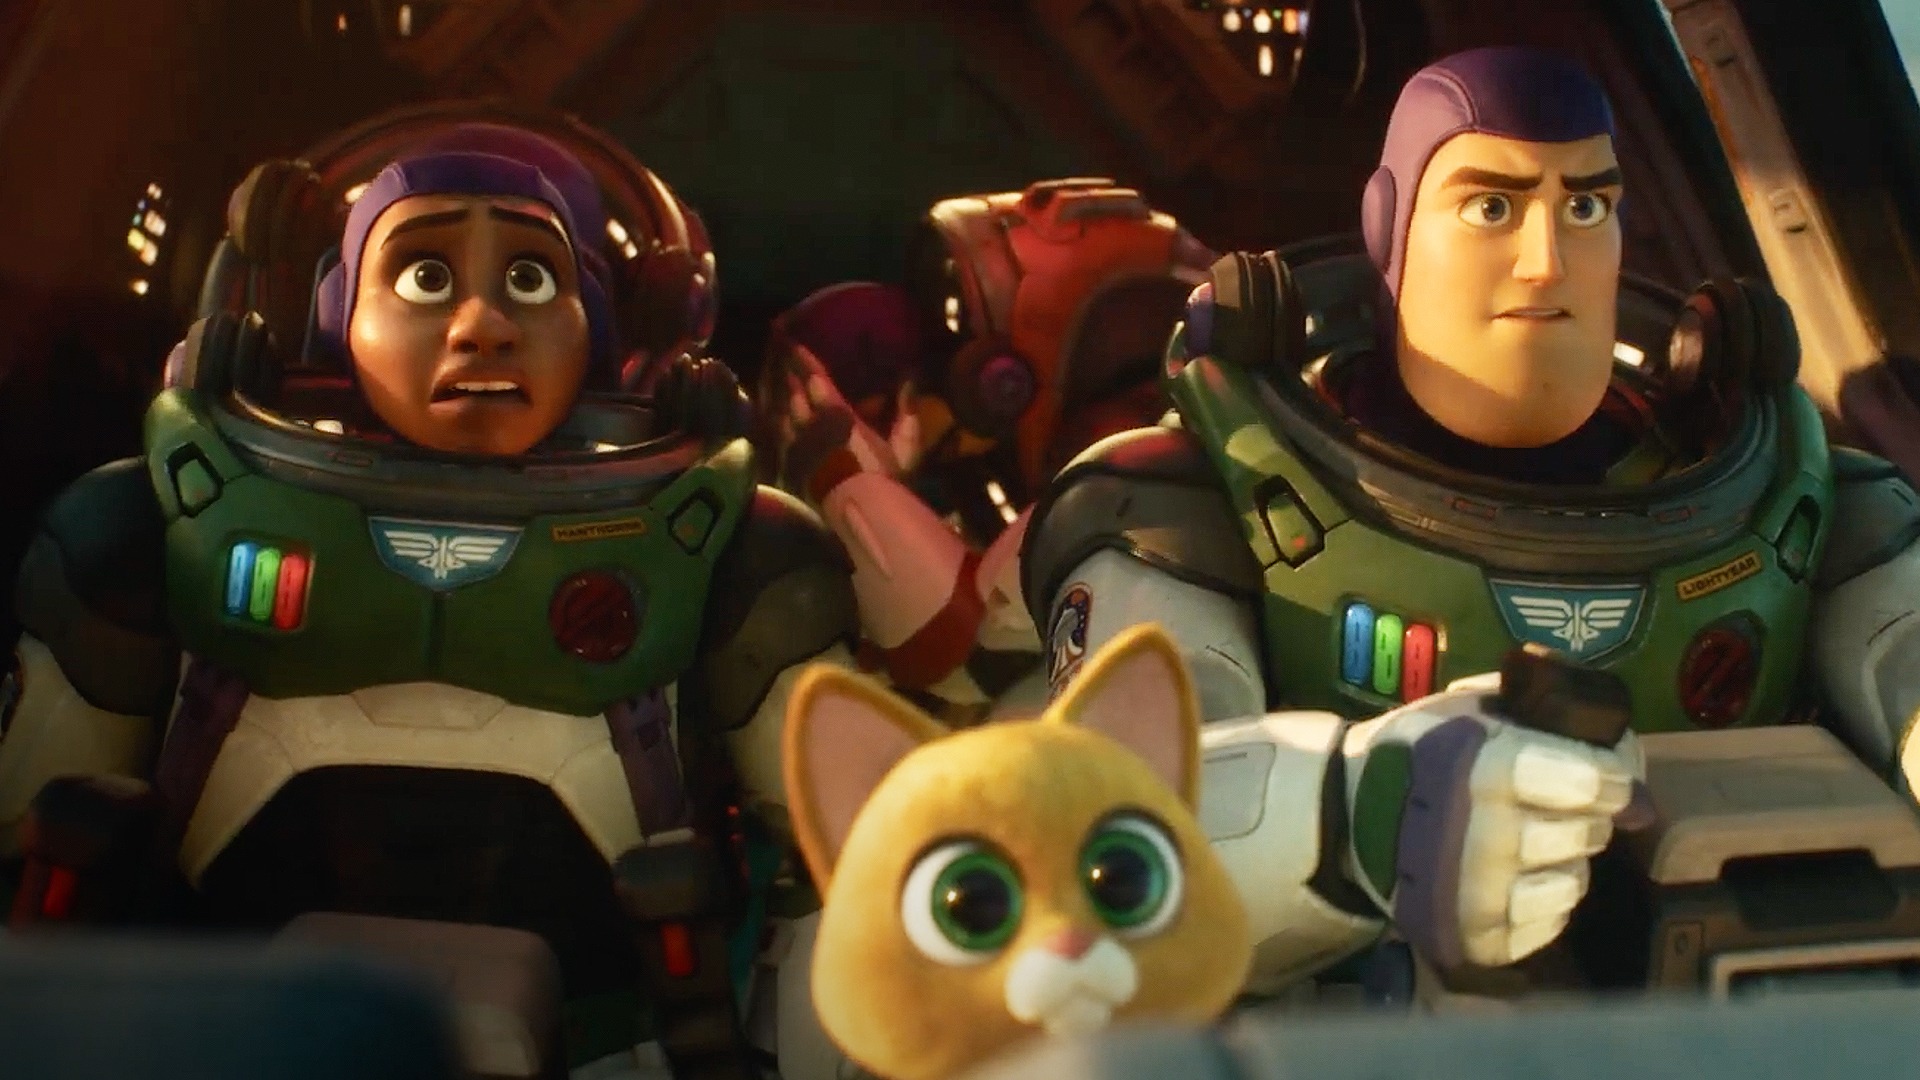 lightyear movie review rotten tomatoes